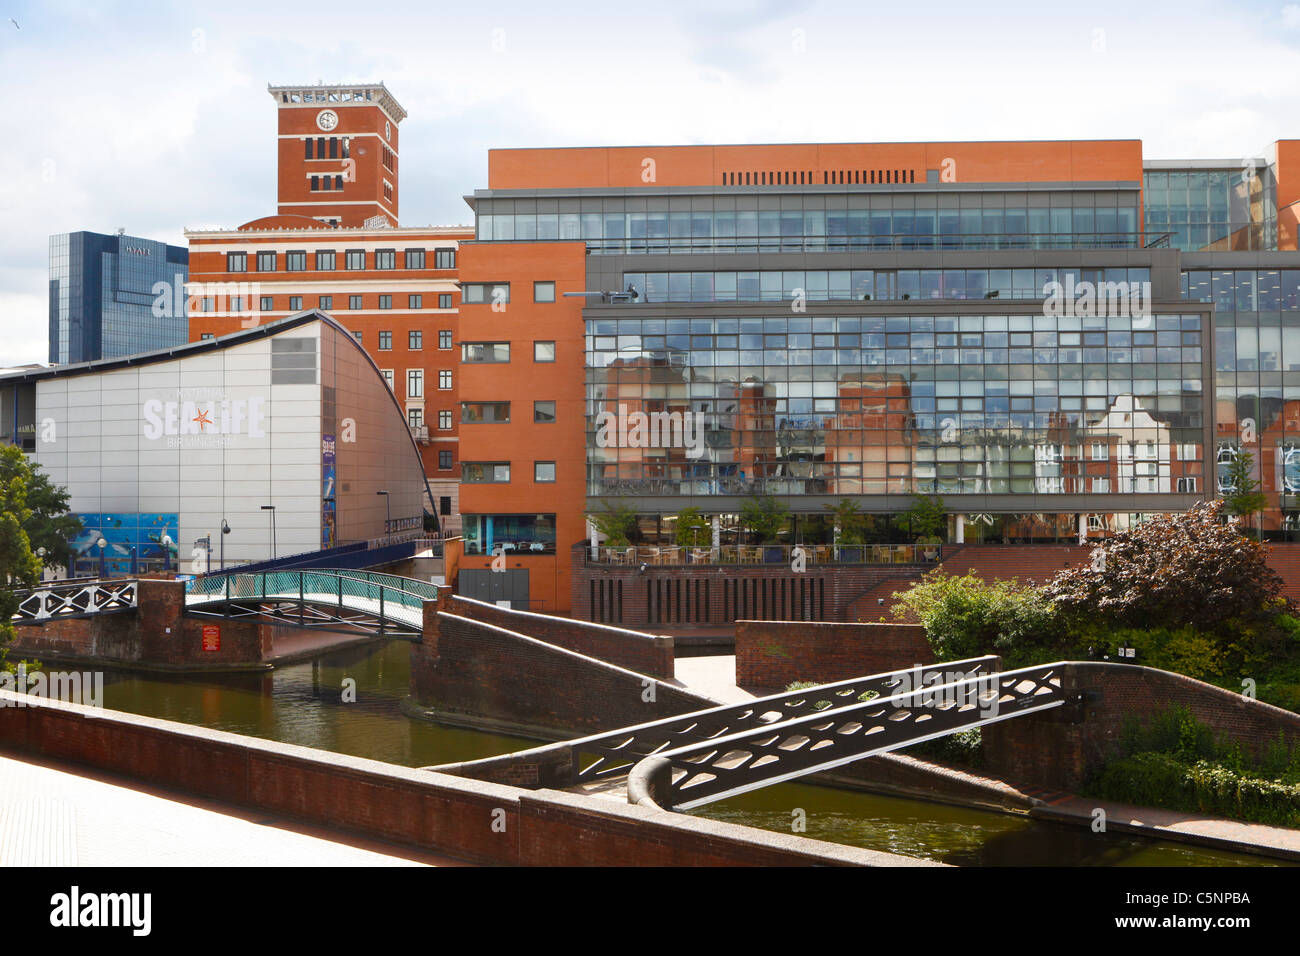 Brindleyplace as seen from the surrounding canals, Birmingham, England UK Stock Photo